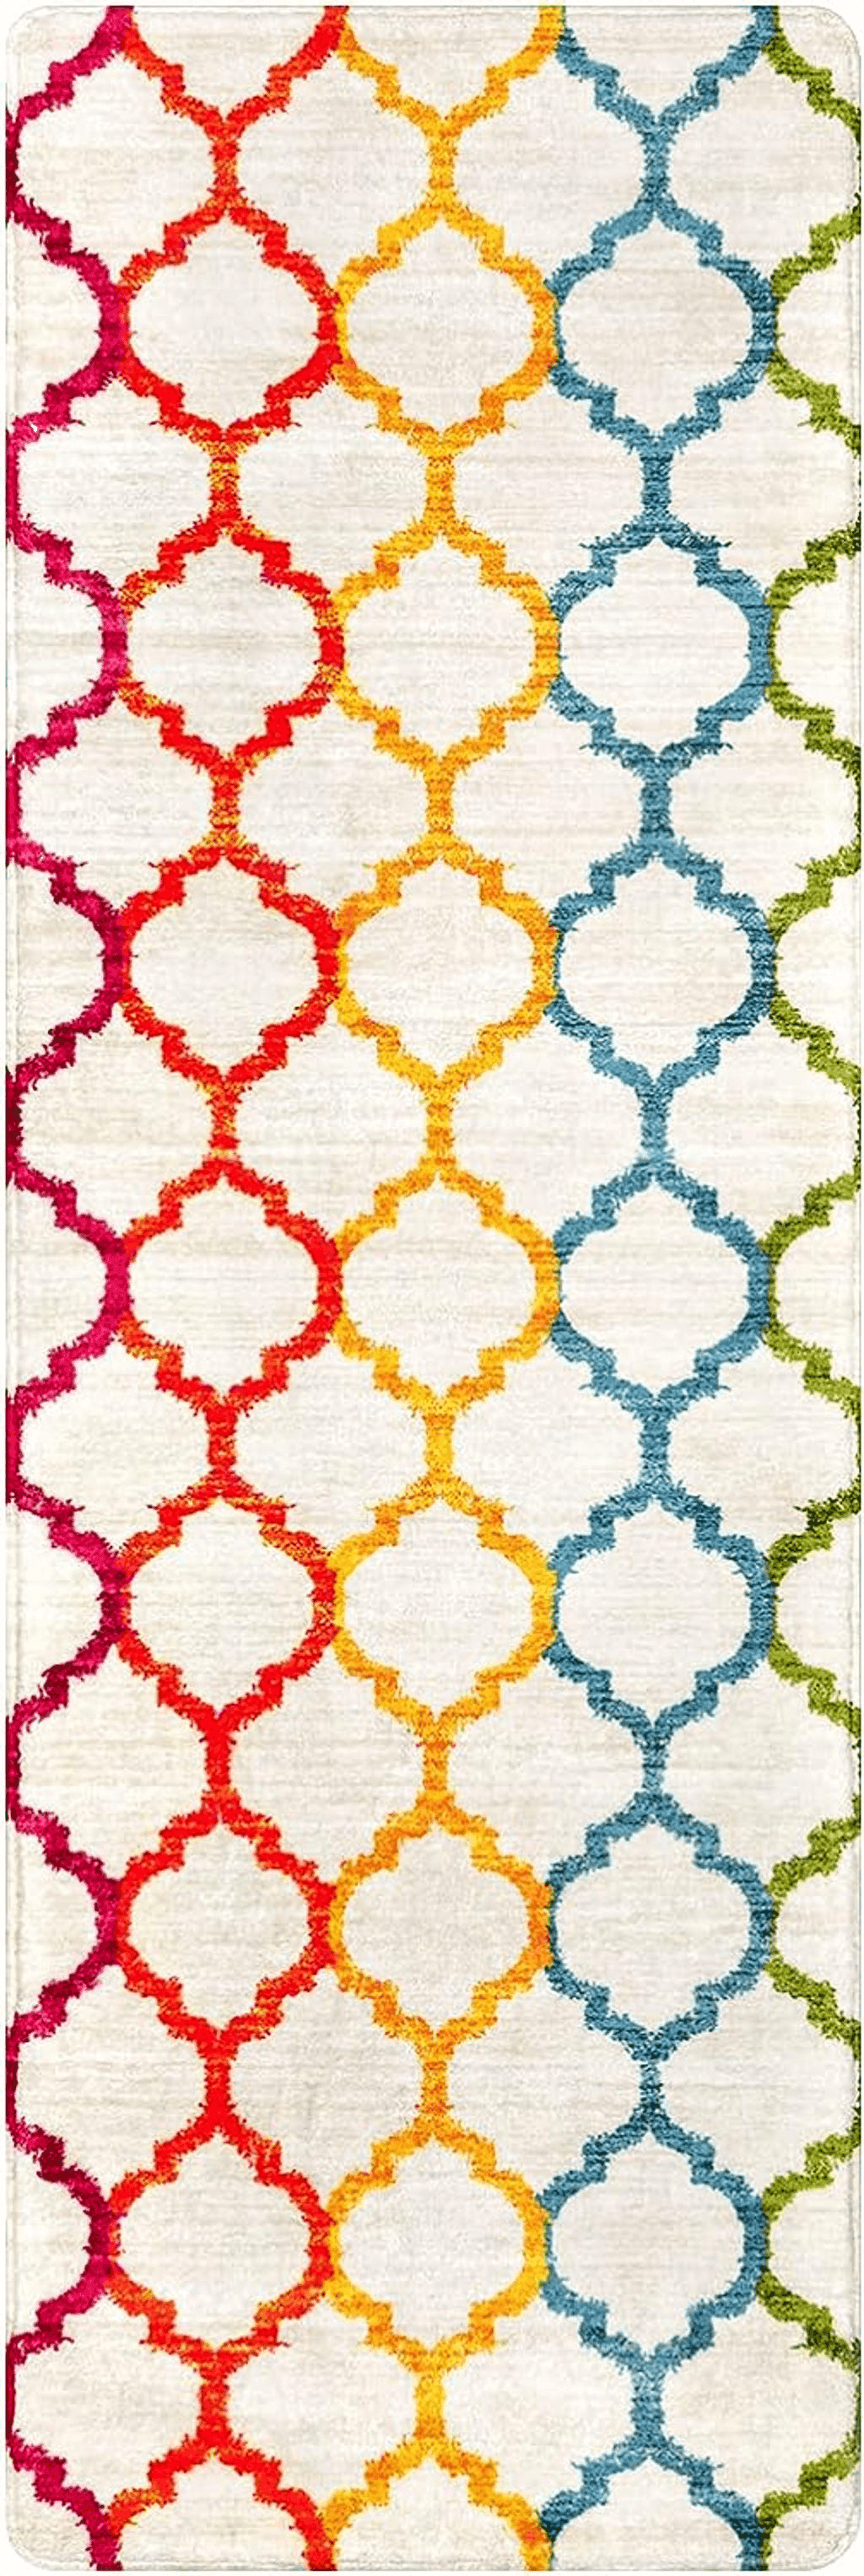 Rainbow Lahome Moroccan Colorful Hallway Runner - 2x6 Washable Non Slip Runner Rug Throw Low-Pile Laundry Room Rug Kitchen Runner Rug Rainbow Print Distressed Carpet Runner for Bedroom Entryway Bathroom